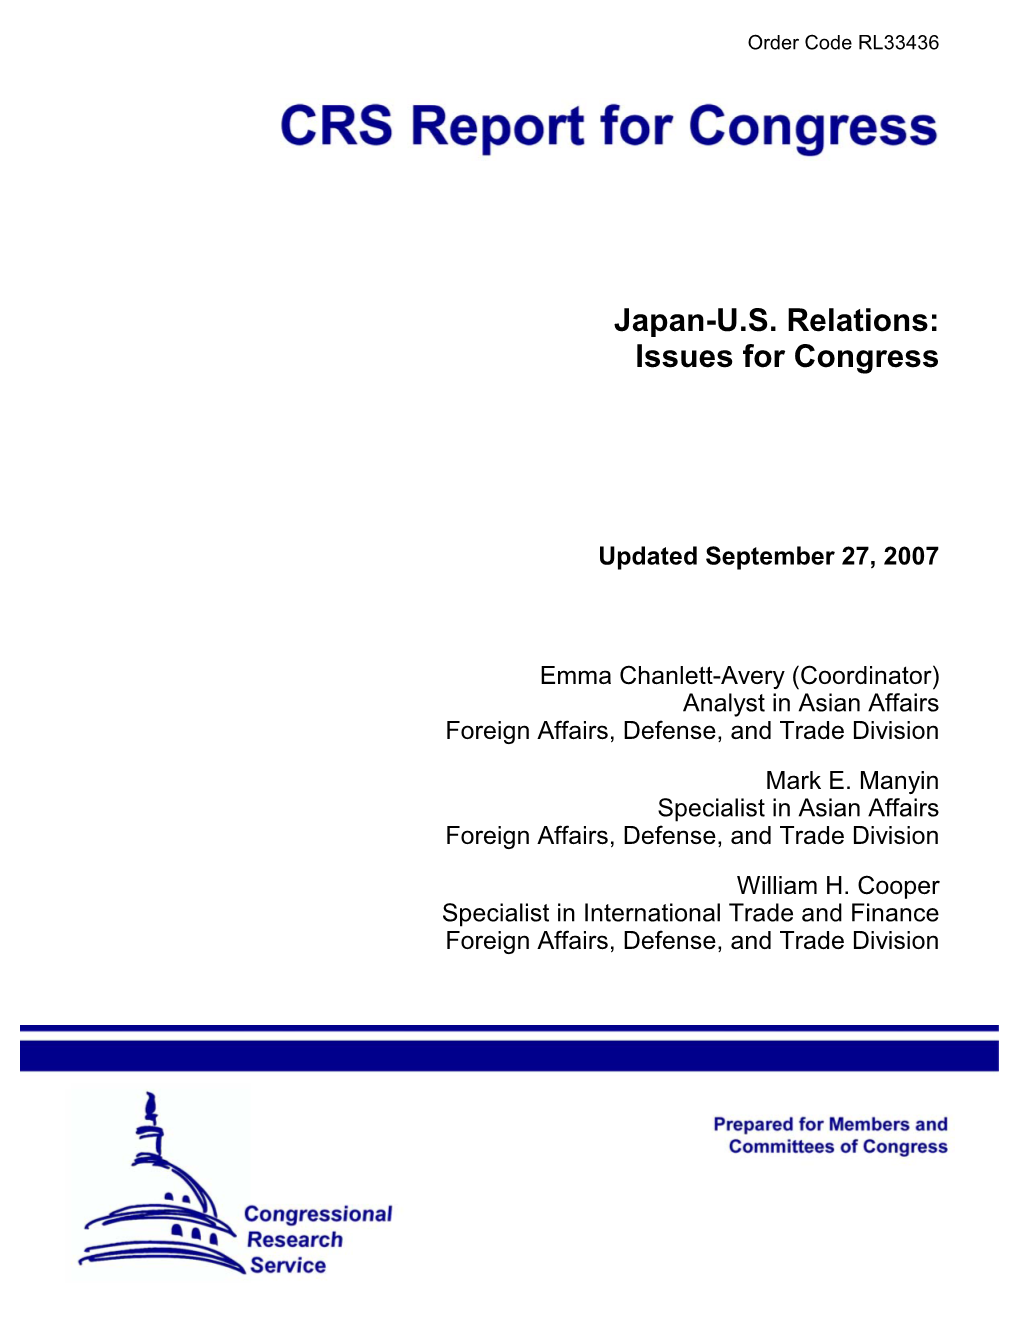 Japan-US Relations: Issues for Congress